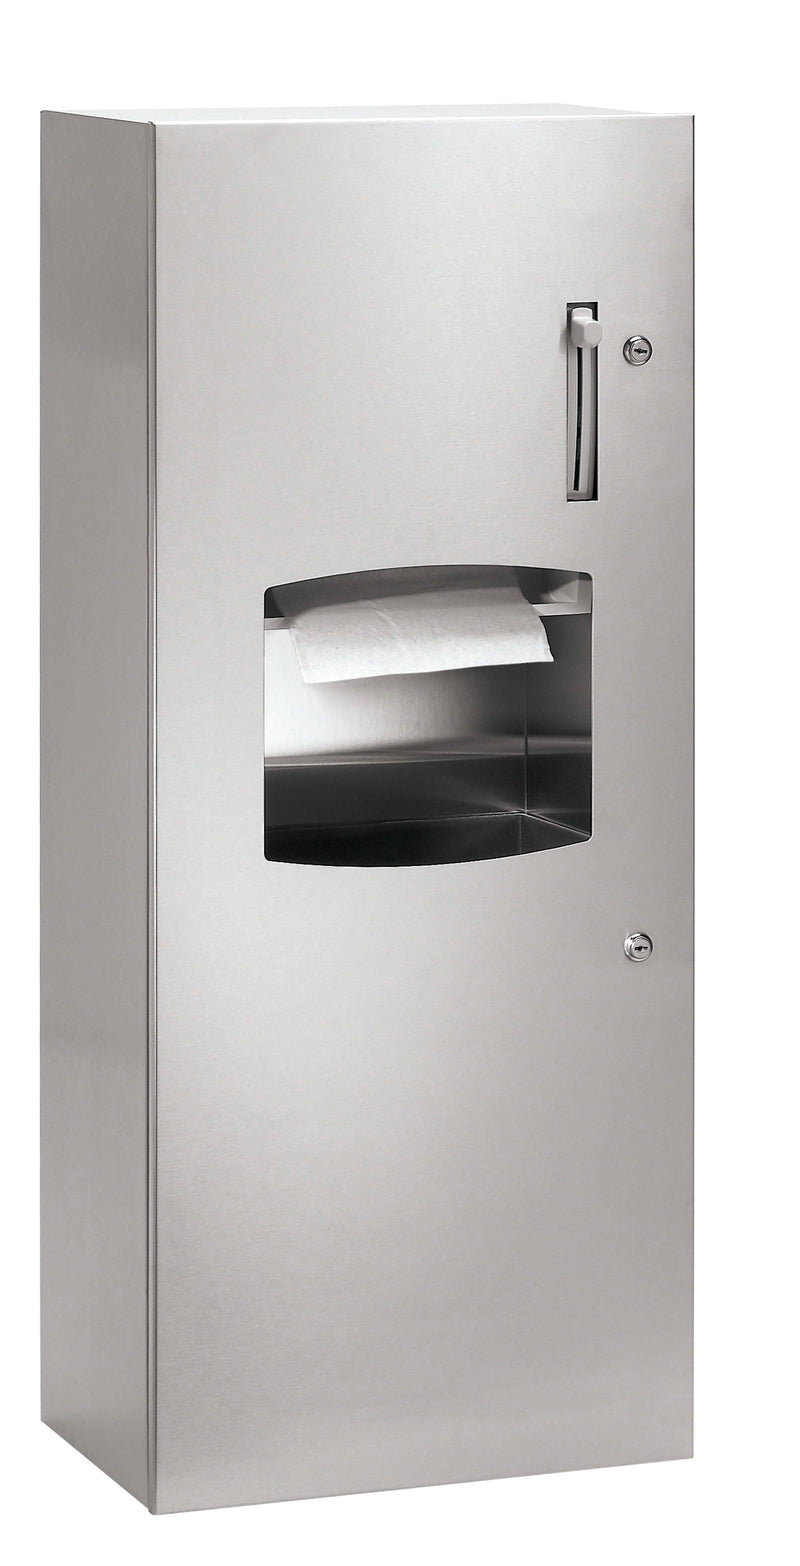 Bradley 2277-11 Combination Commercial Paper Towel Dispenser/Waste Receptacle, Surface-Mounted, Stainless Steel - TotalRestroom.com